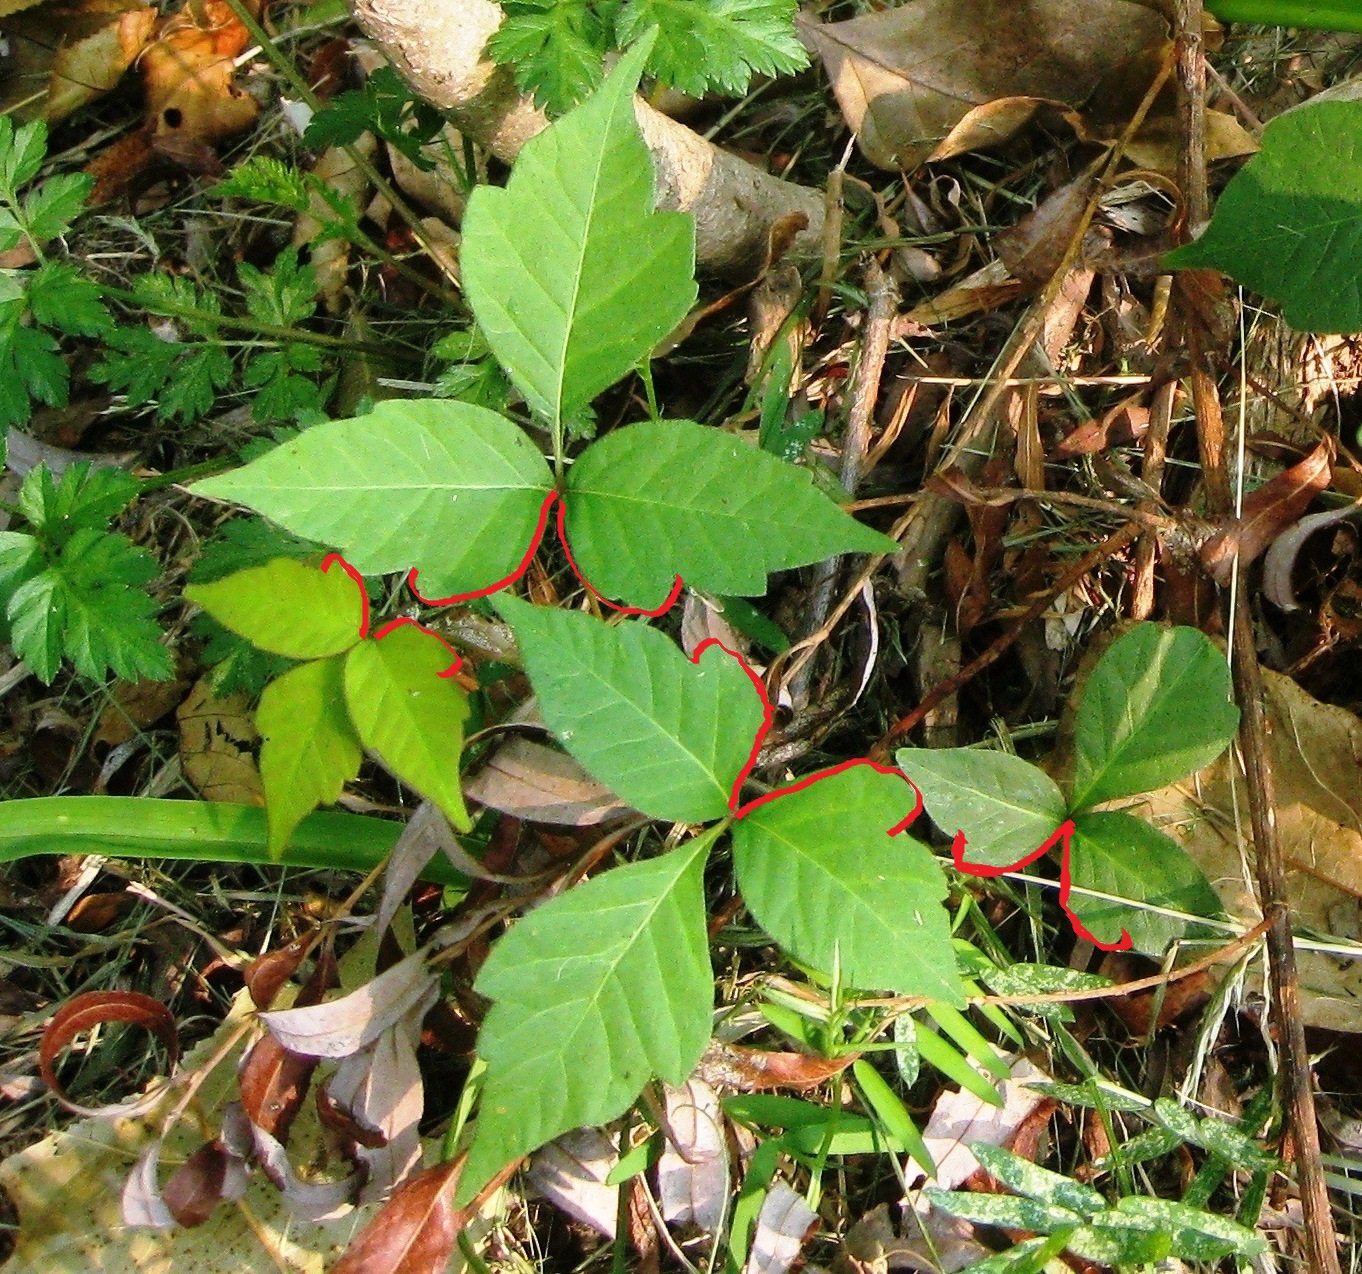 Poison Ivy Poison Ivy Patrol Specialty Landscaping Invasive Plant Removal,Mercury Head Dime Wine